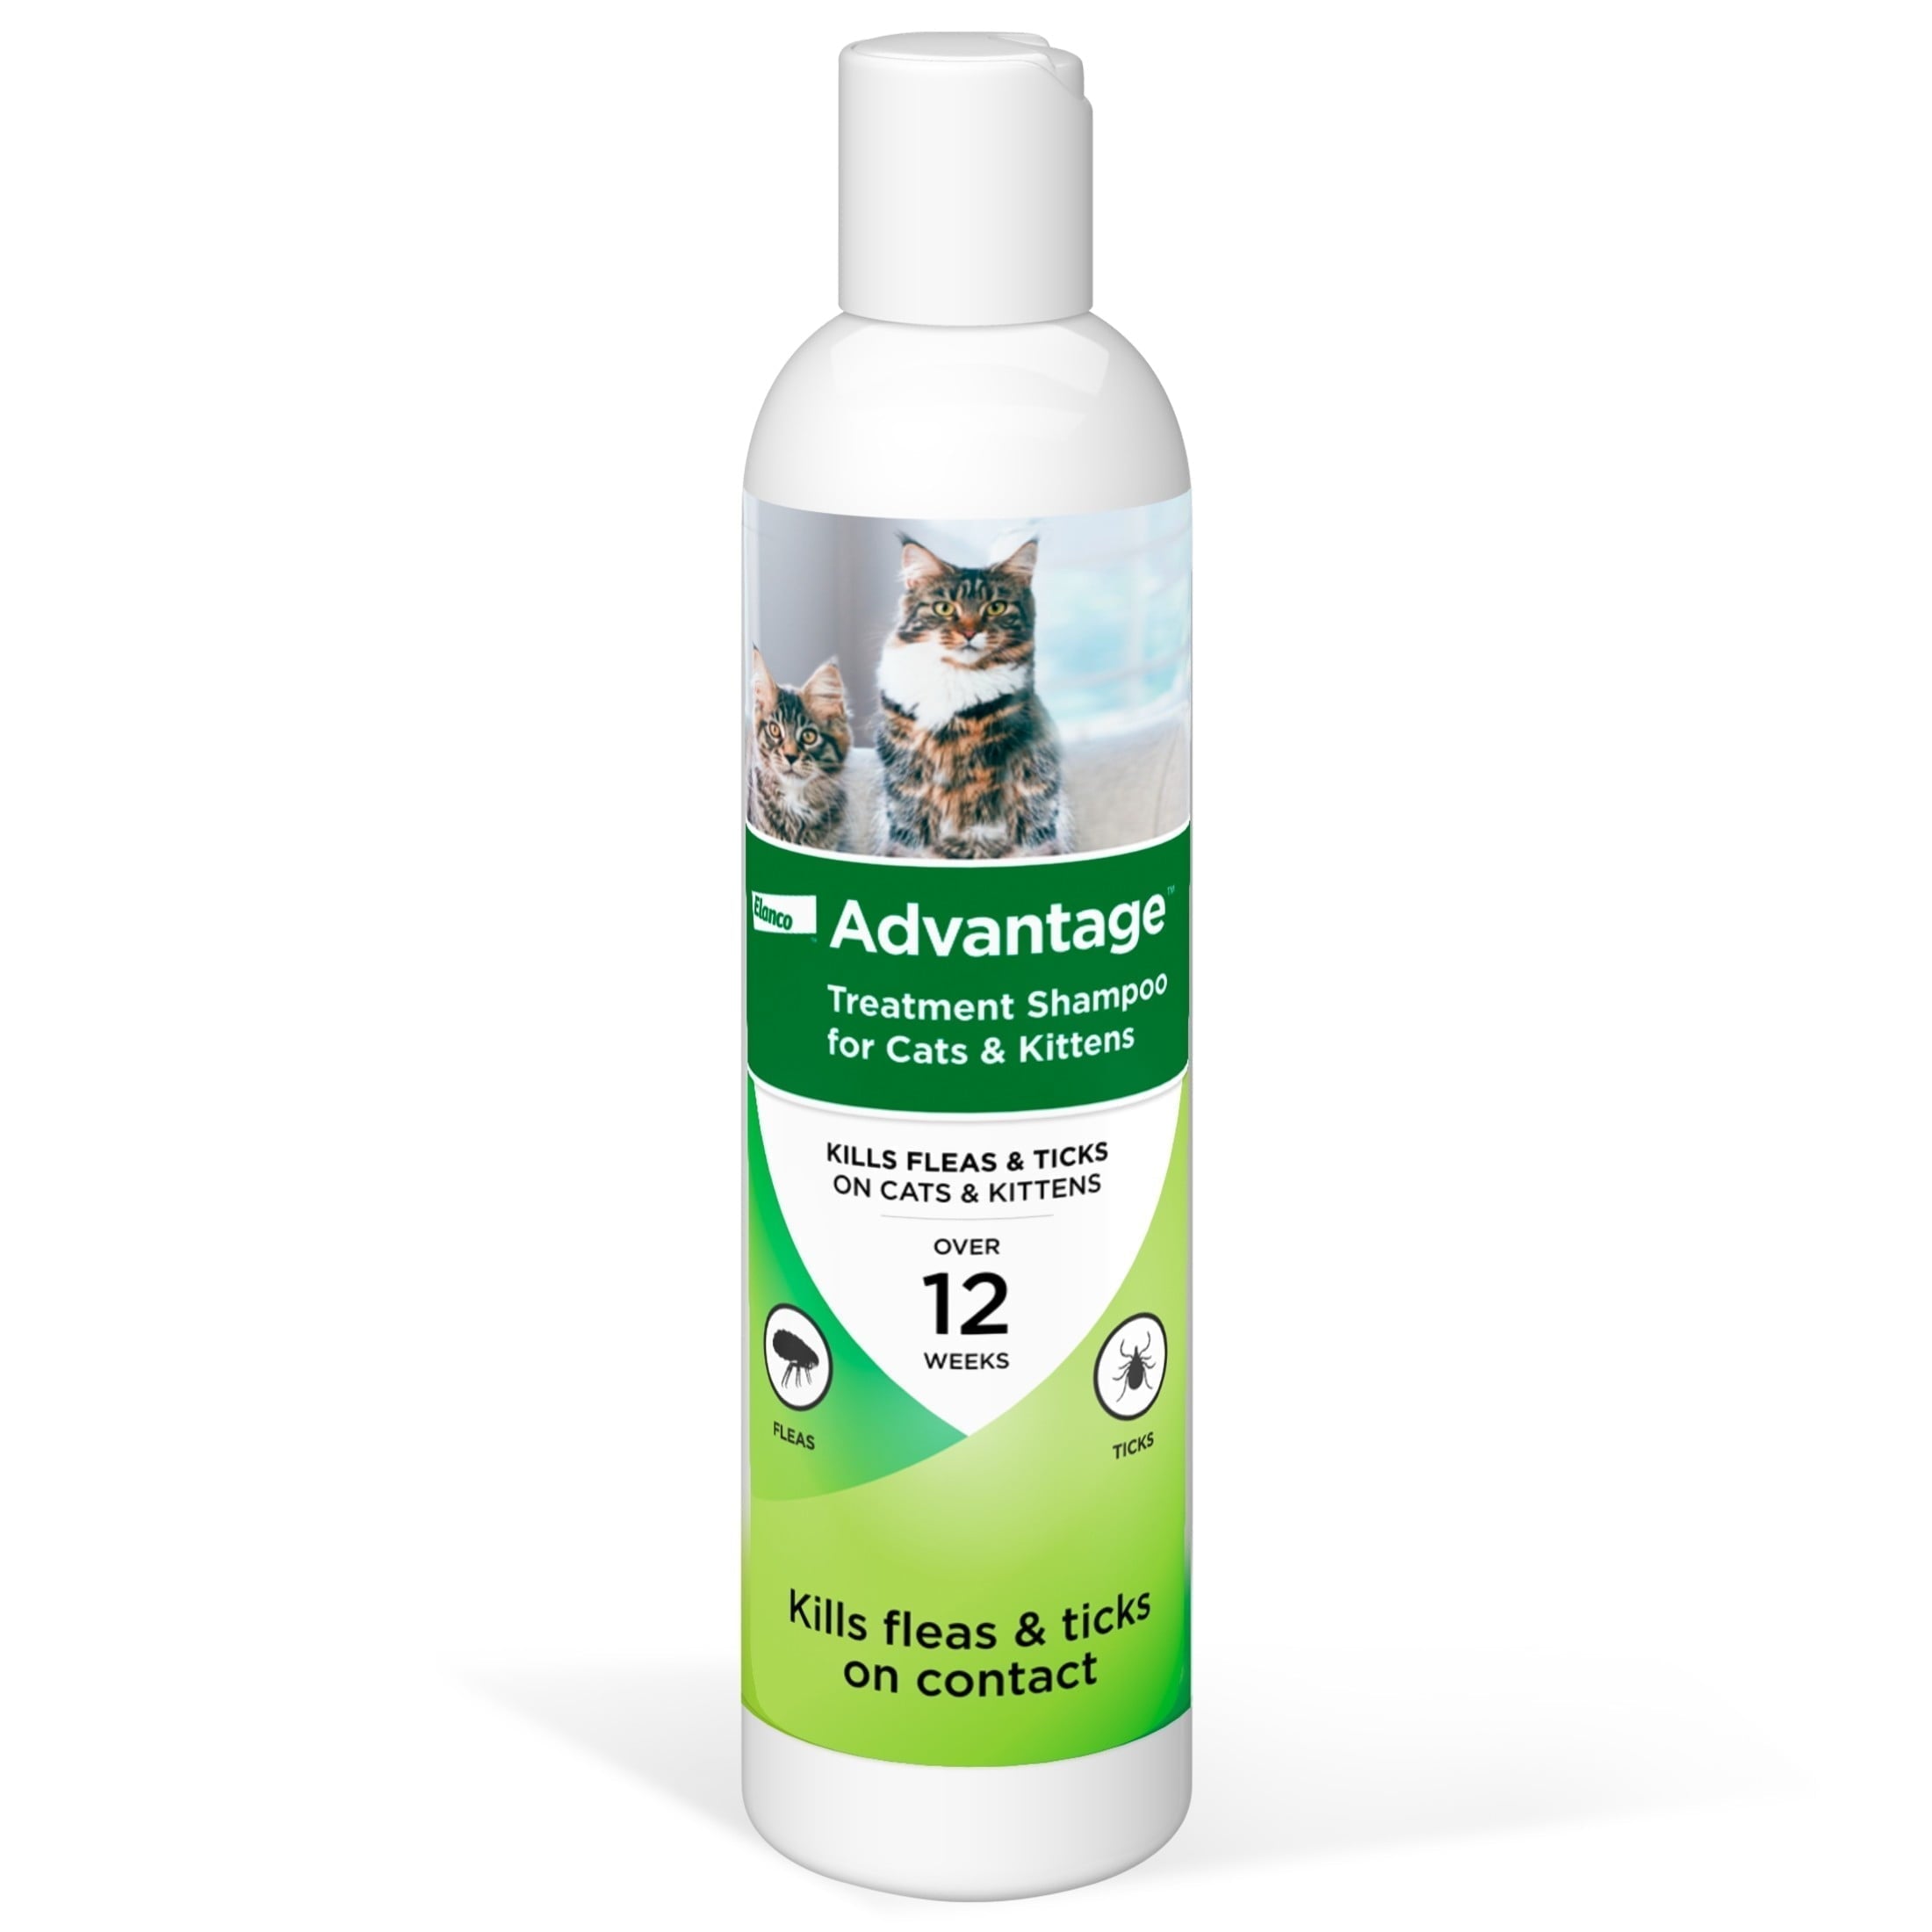 Wholesale prices with free shipping all over United States Advantage Cat Flea & Tick Shampoo for Kittens & Adult Cats, Kills Fleas & Ticks, 8 oz. - Steven Deals